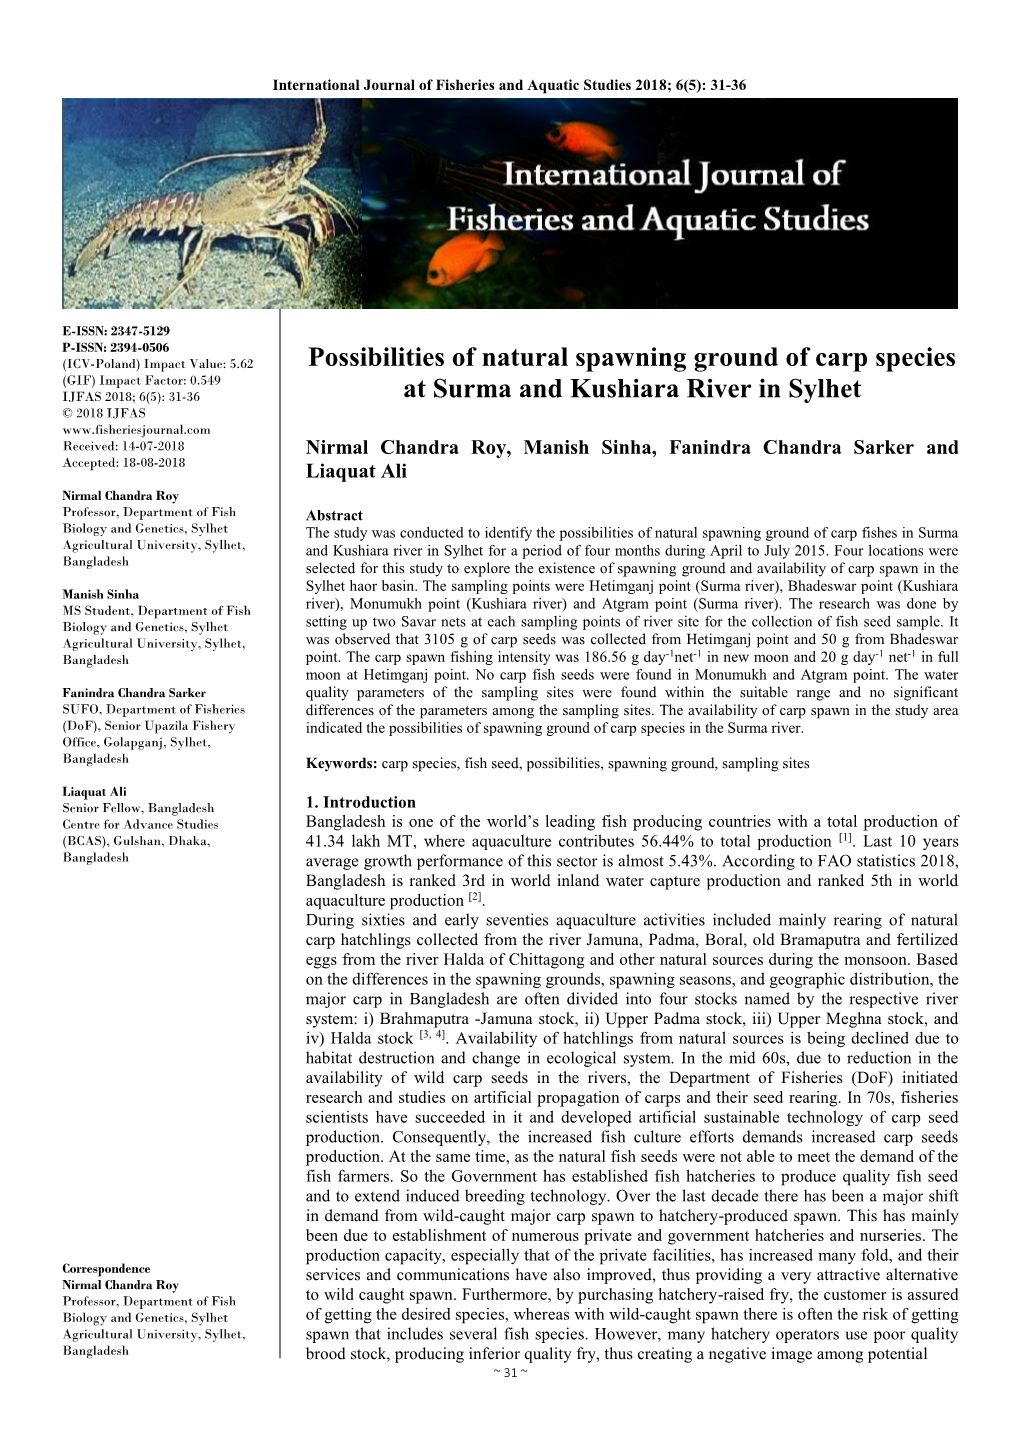 Possibilities of Natural Spawning Ground of Carp Species at Surma